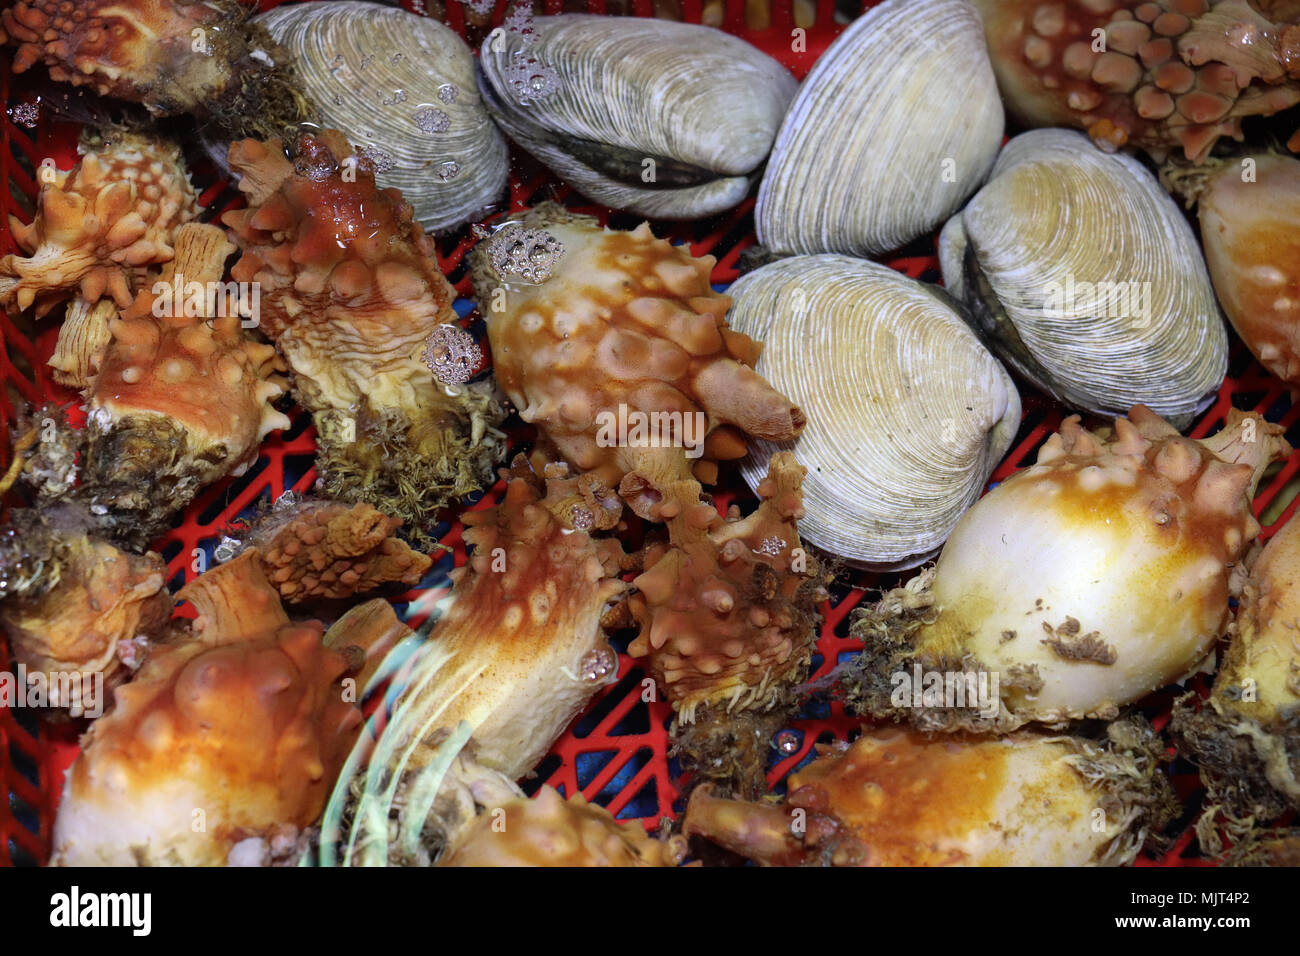 Seafood on sale at the Traditional Market on Ganghwa Island, South Korea, includes clams and sea squirts, which are called mong-gae or meongge. Stock Photo